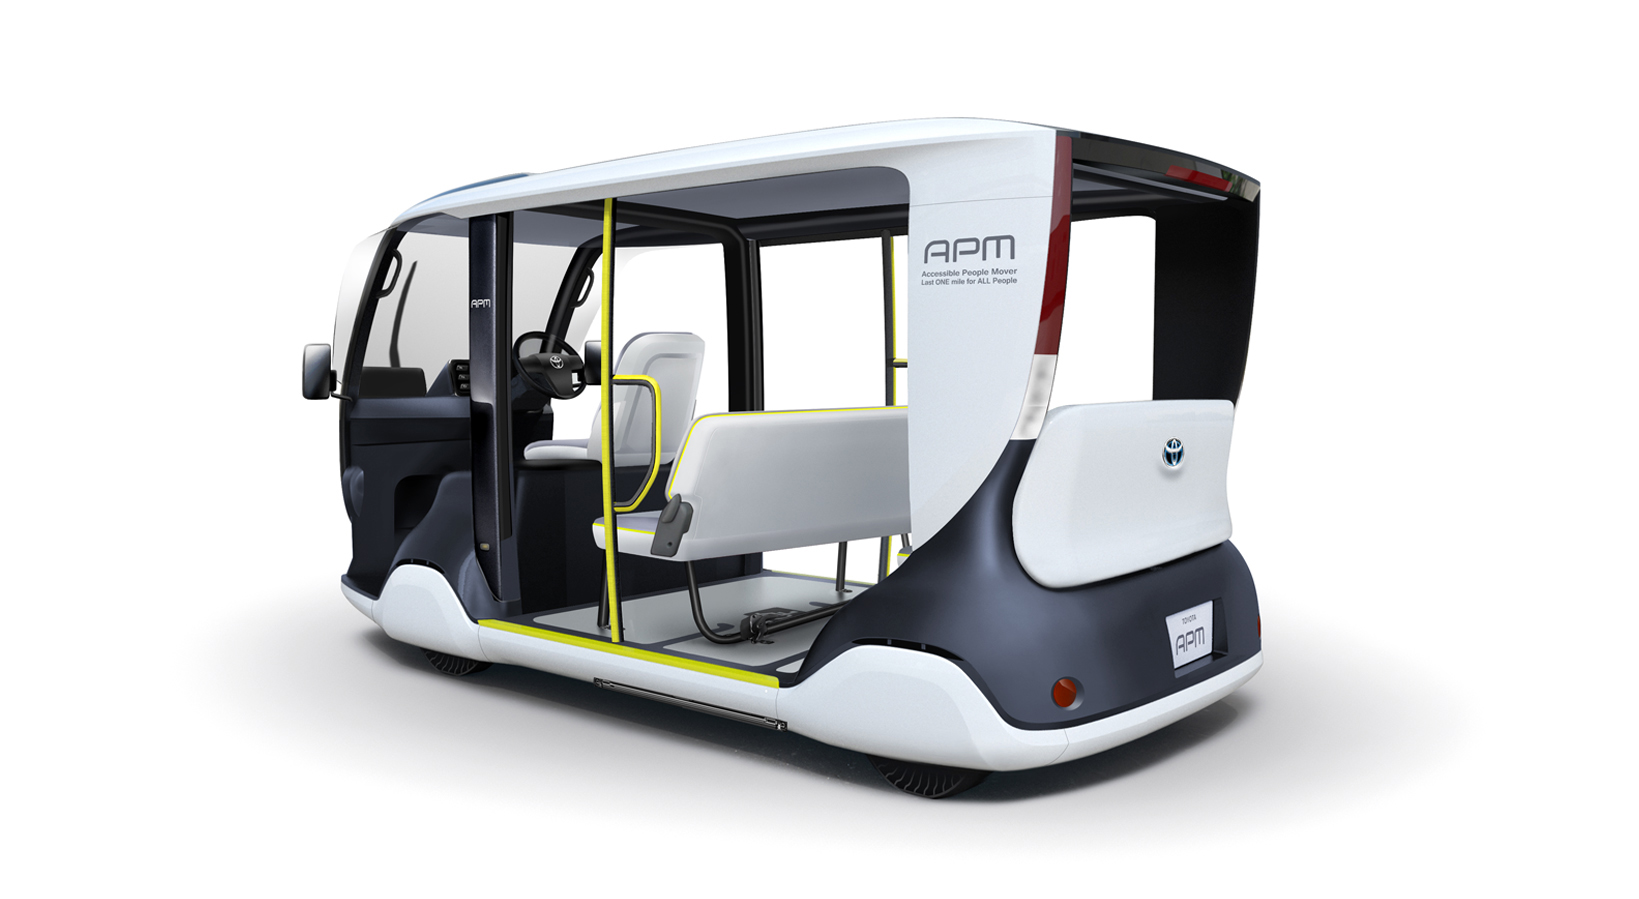 The black and white electric van called the Toyota APM, Accessible People Mover